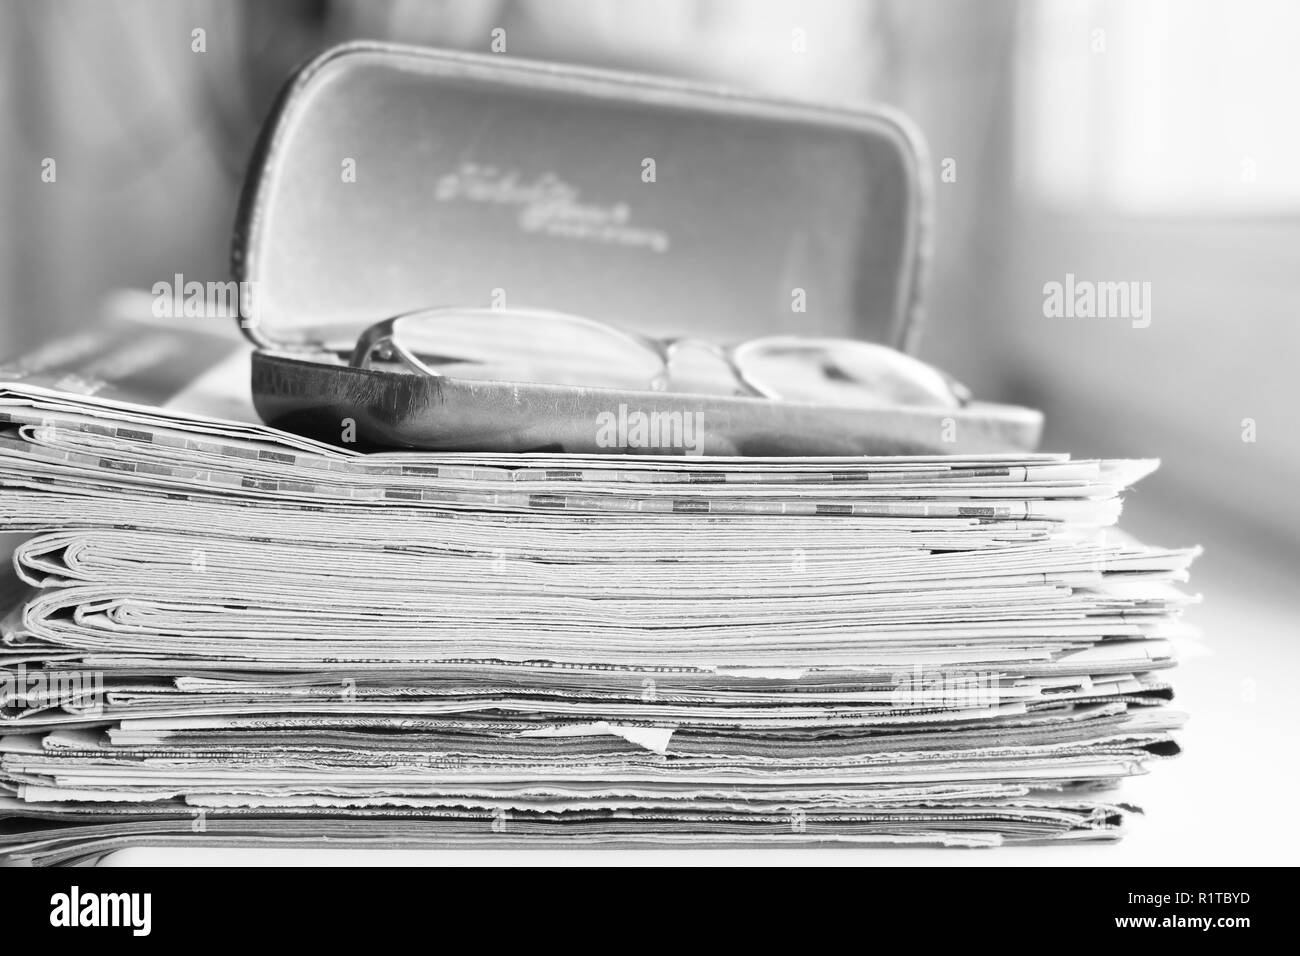 Big pile of newspapers and reading glasses in leather case, business concept Stock Photo